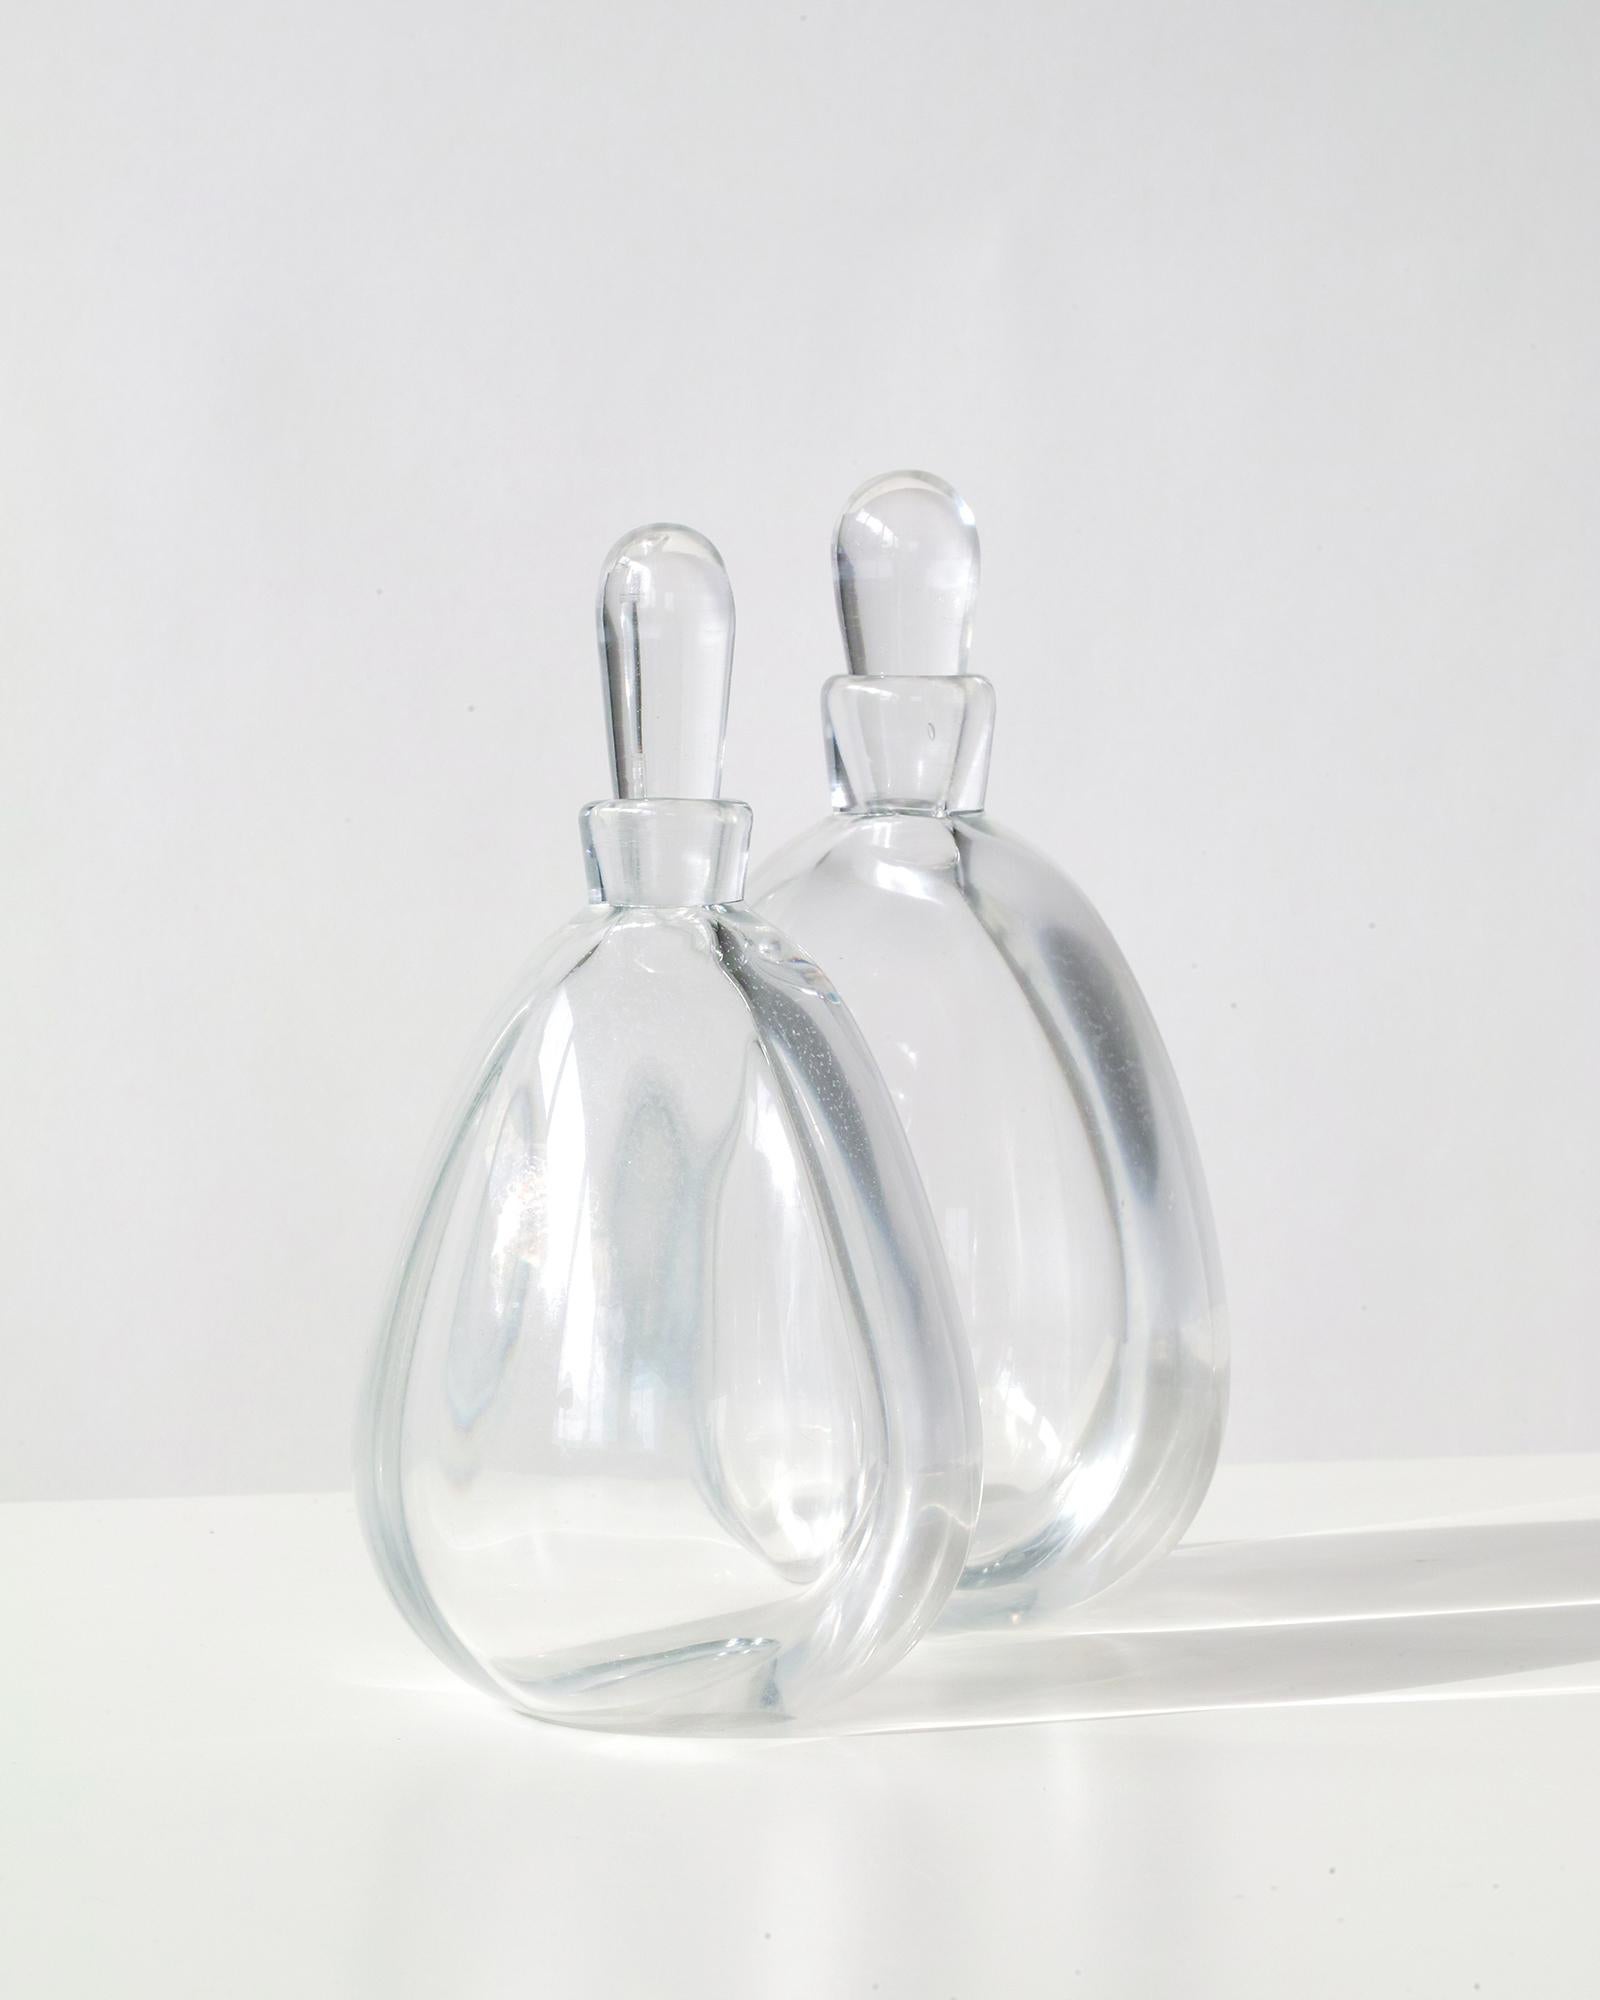 For your consideration is this exceptional and rare pair of early decorative art glass bottles by Vicke Lindstand for Orrefors, Sweden. Each handmade/mouth-blown bottle is unique and designed to display as a compliment to the other. The bottles have